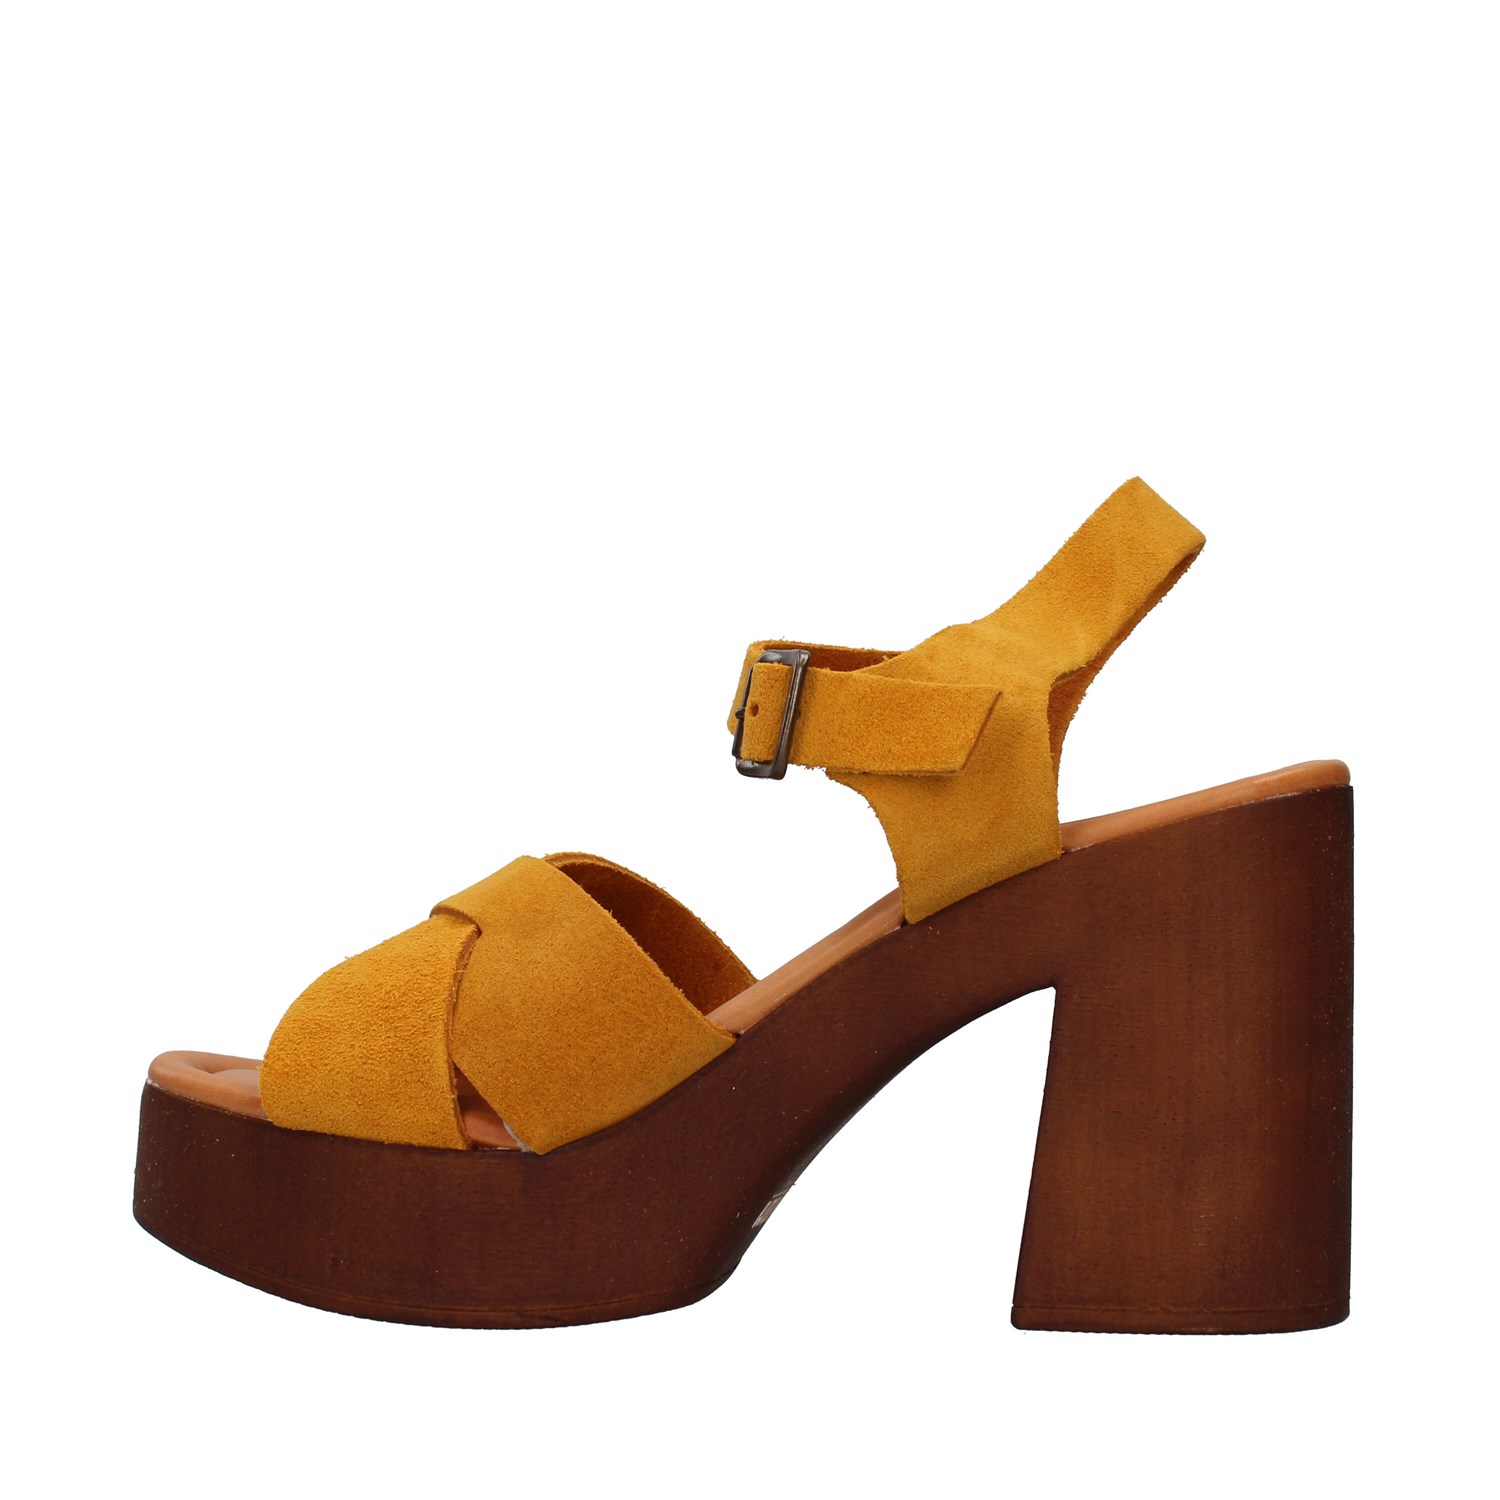 Bionatura Shoes Woman With heel YELLOW 87A2134